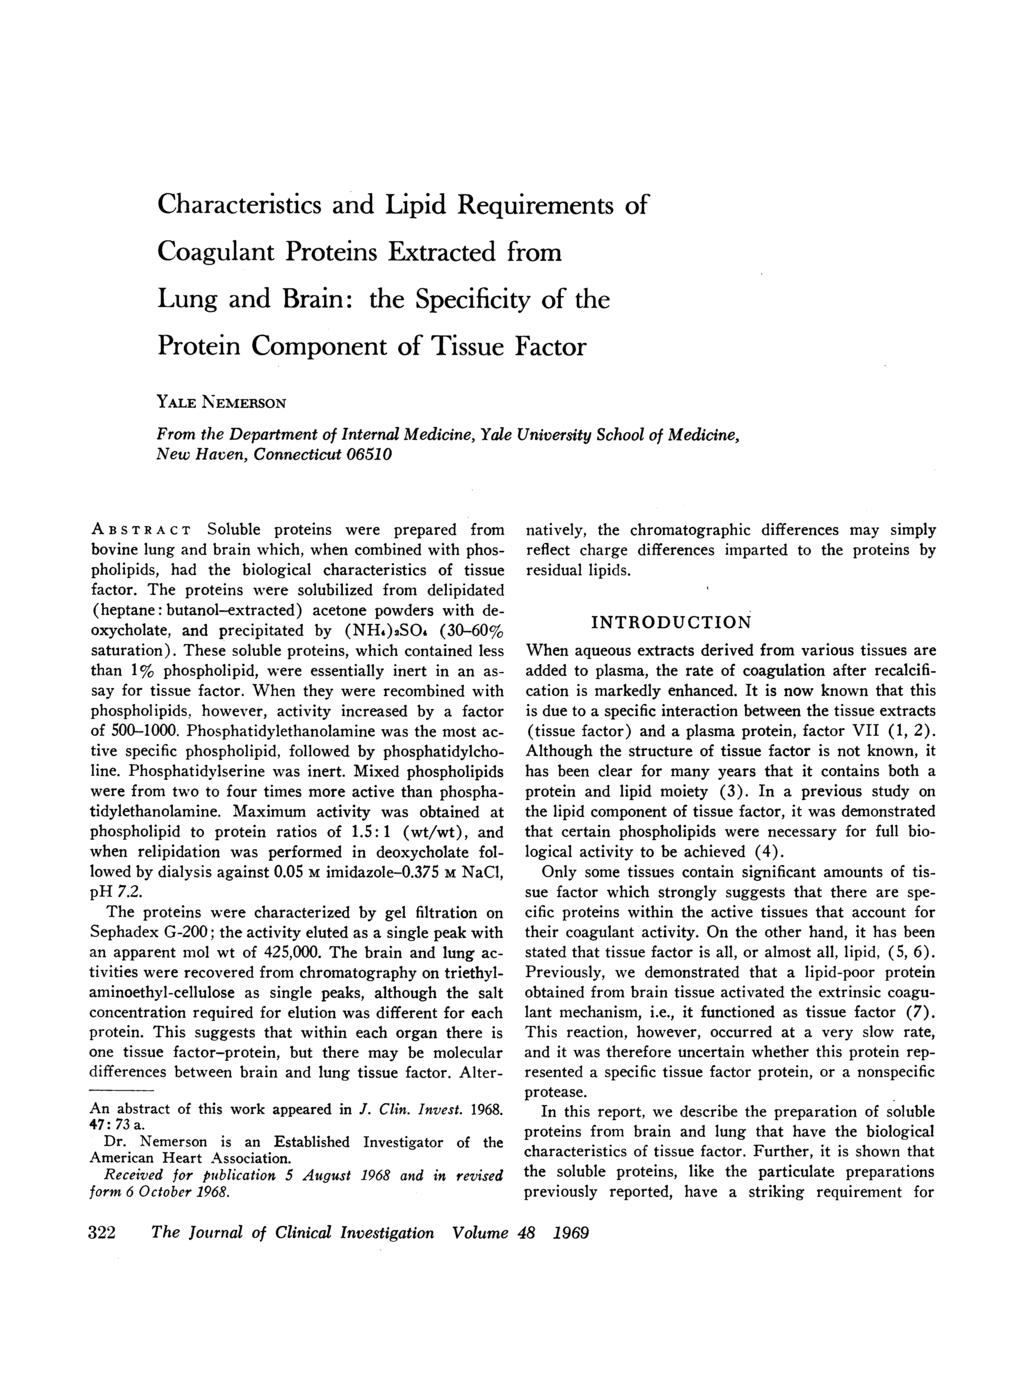 Characteristics and Lipid Requirements of Coagulant Proteins Extracted from Lung and Brain: the Specificity of the Protein Component of Tissue Factor YALE NEMERSON From the Department of Internal